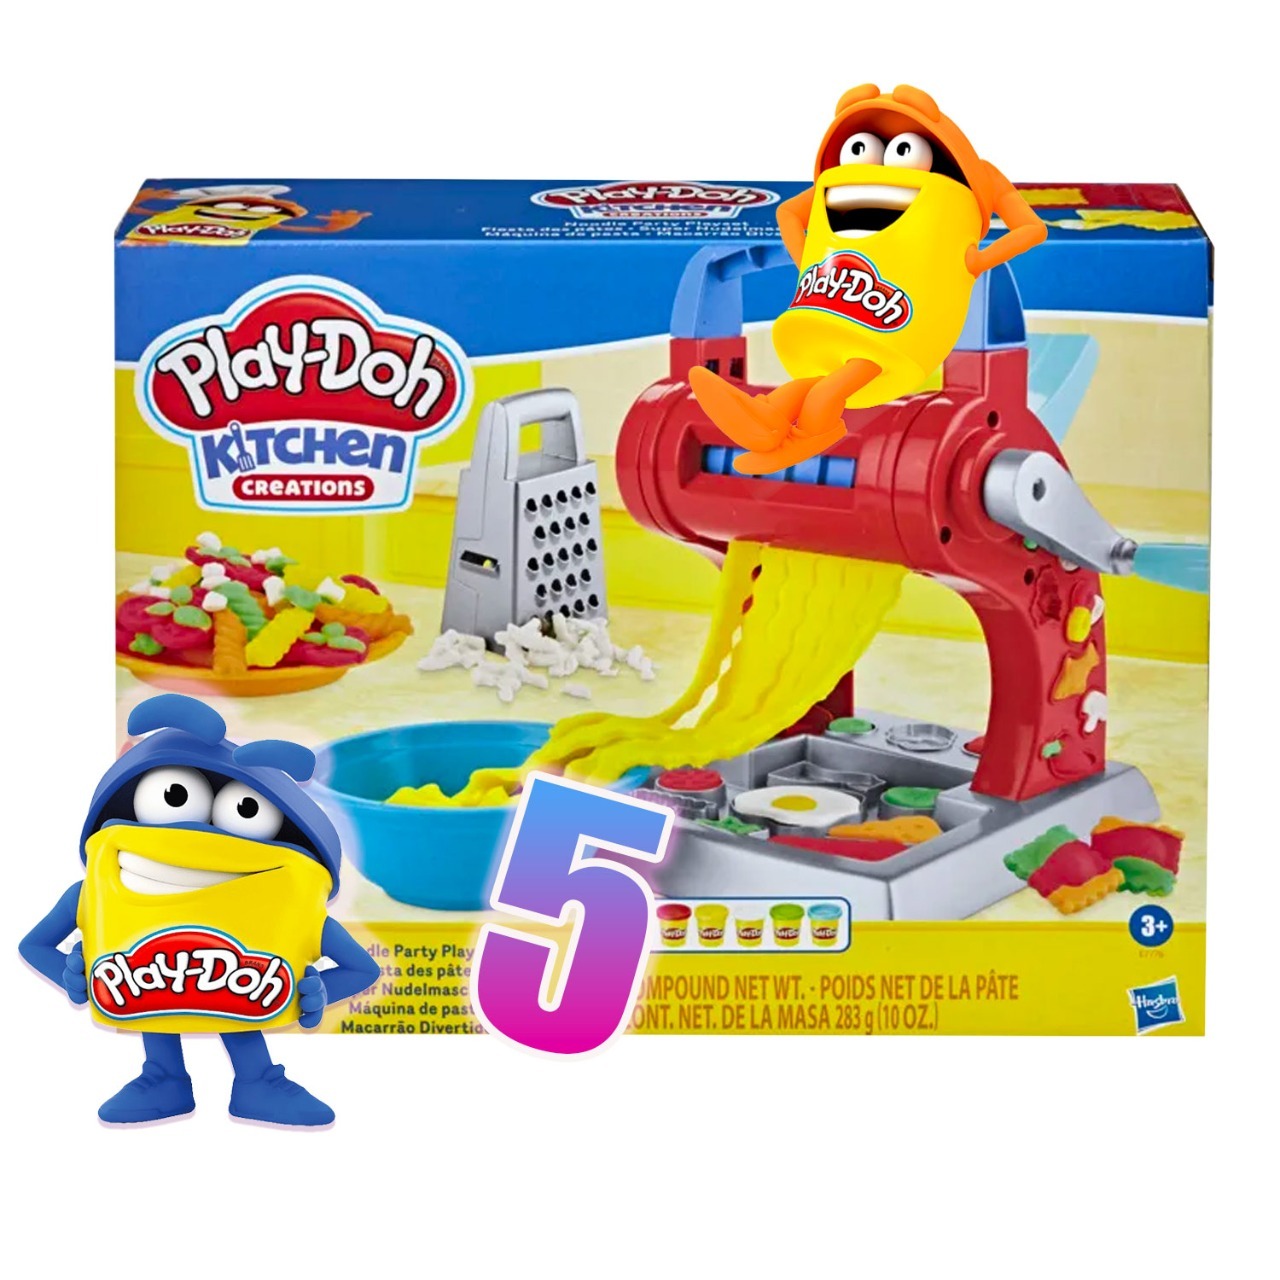 Play doh dick cut with knight